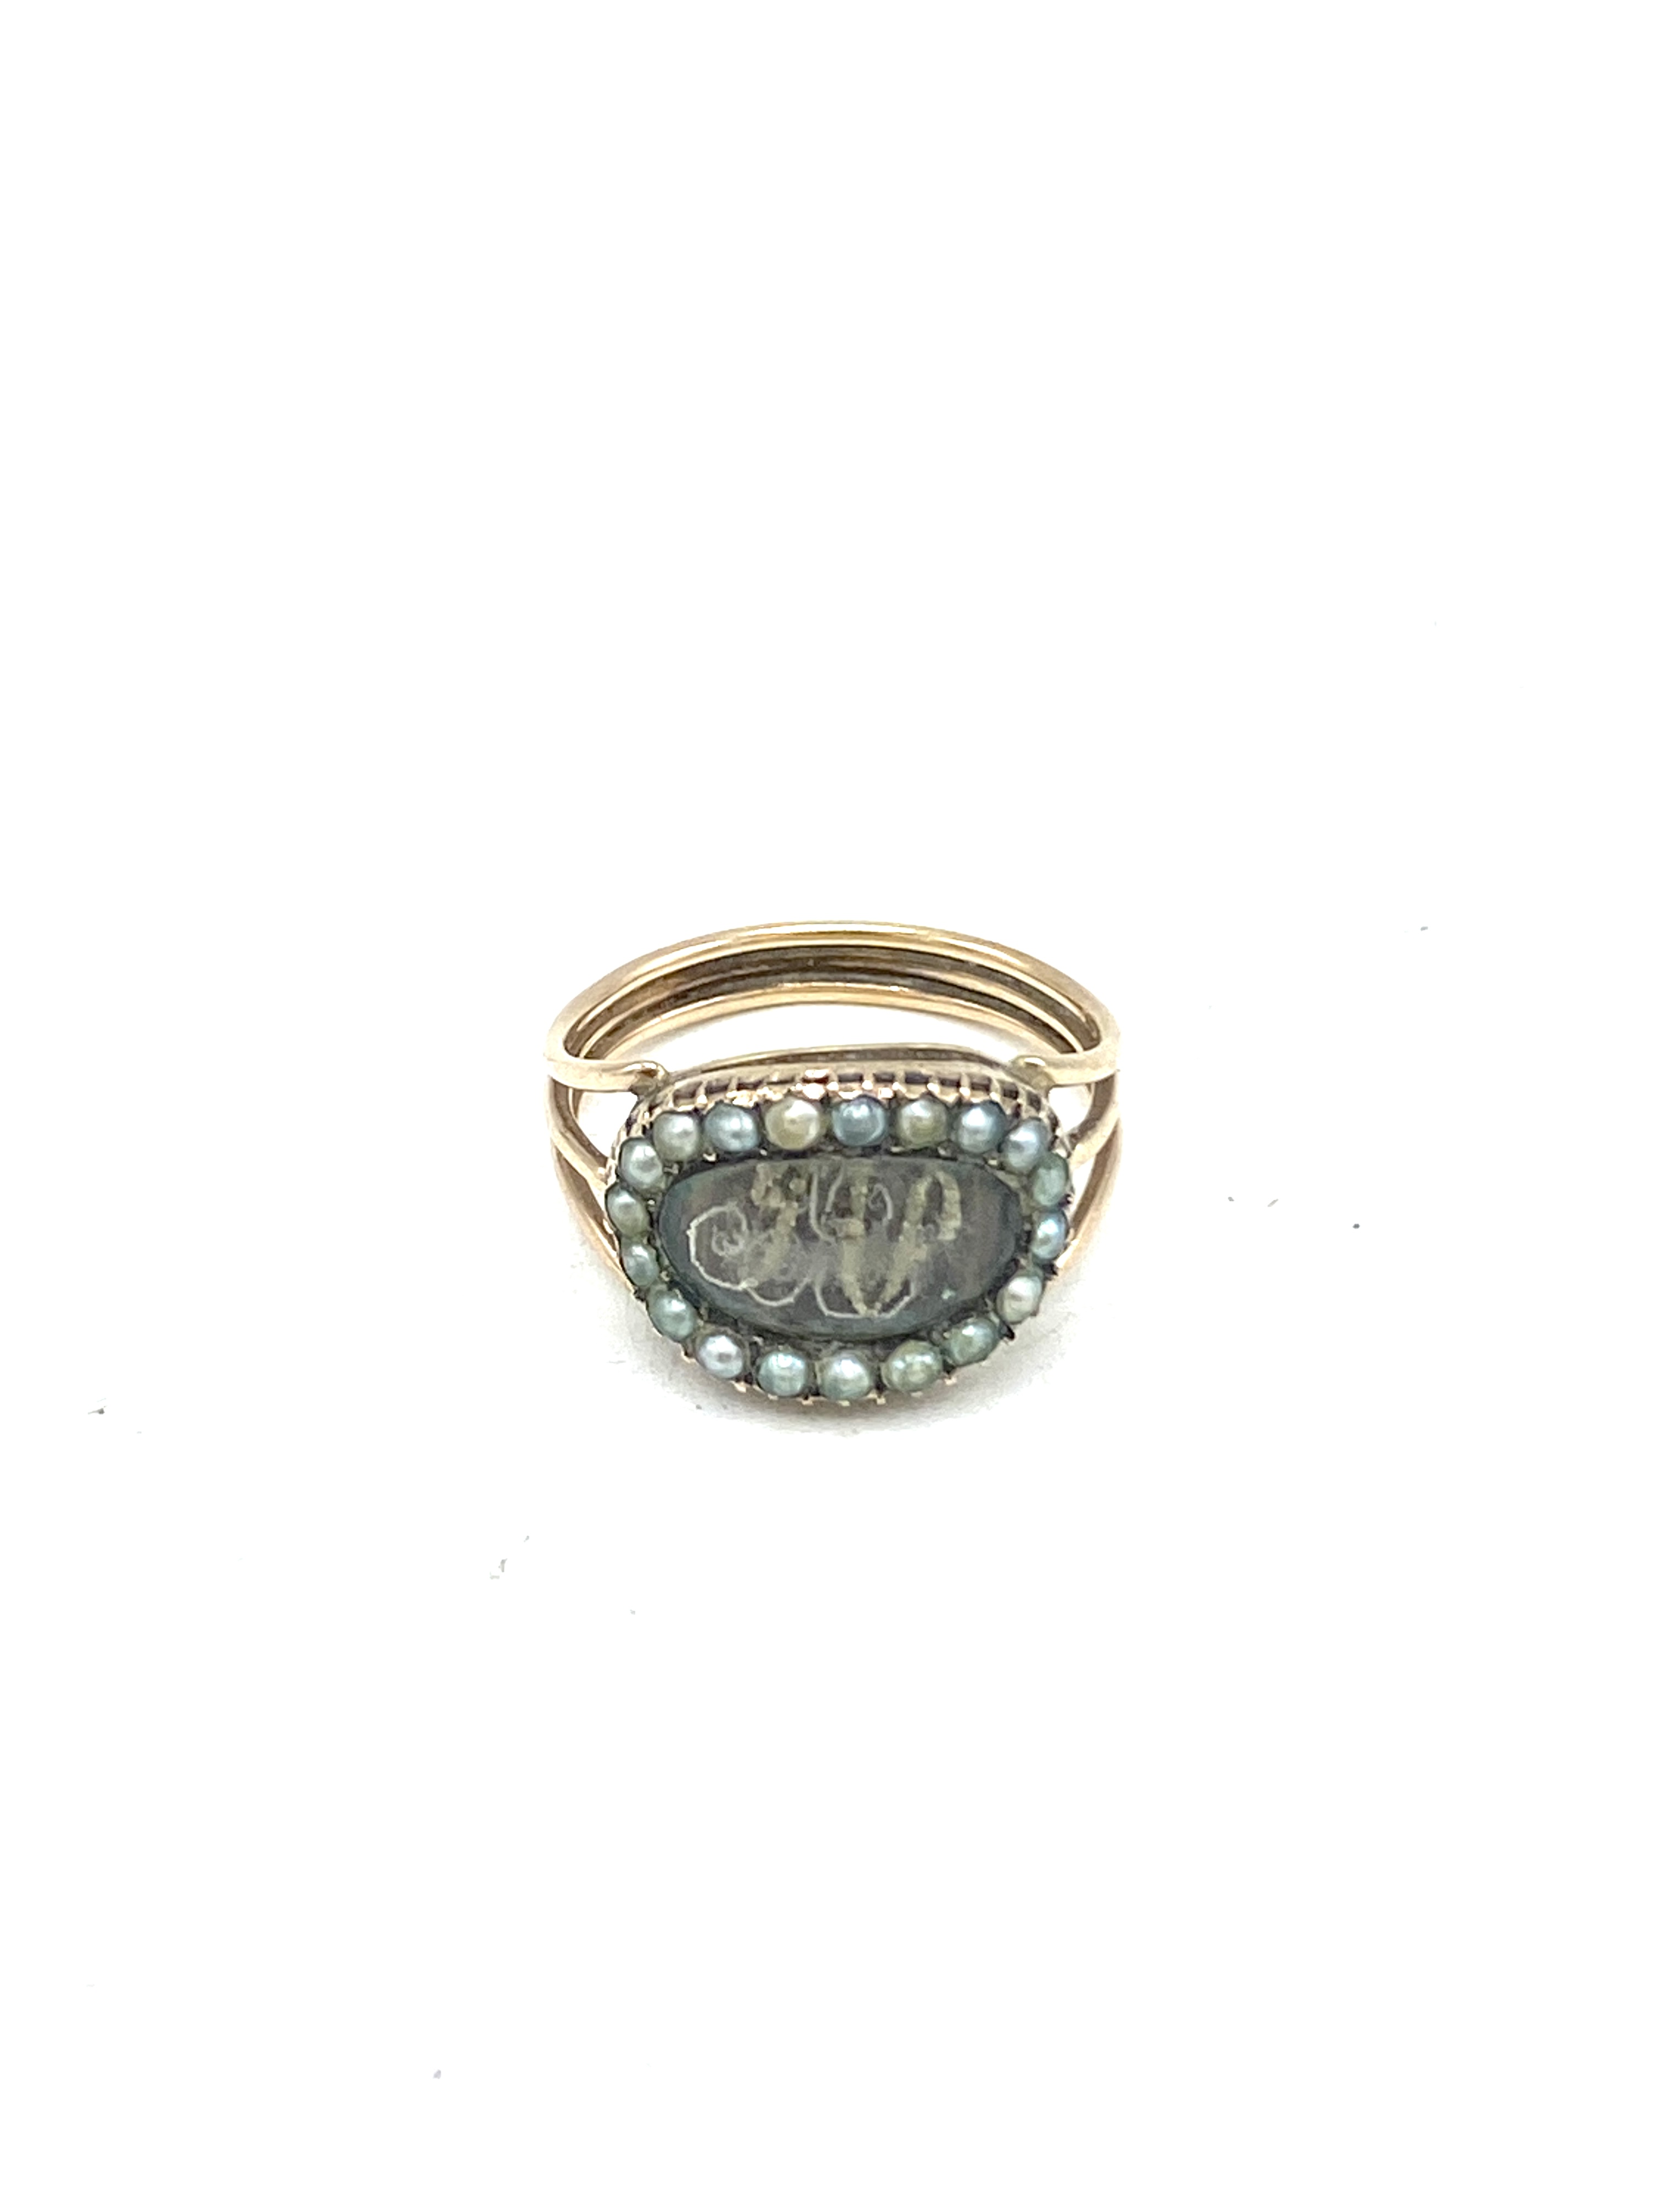 19th century emerald and pearl ring - Image 2 of 8